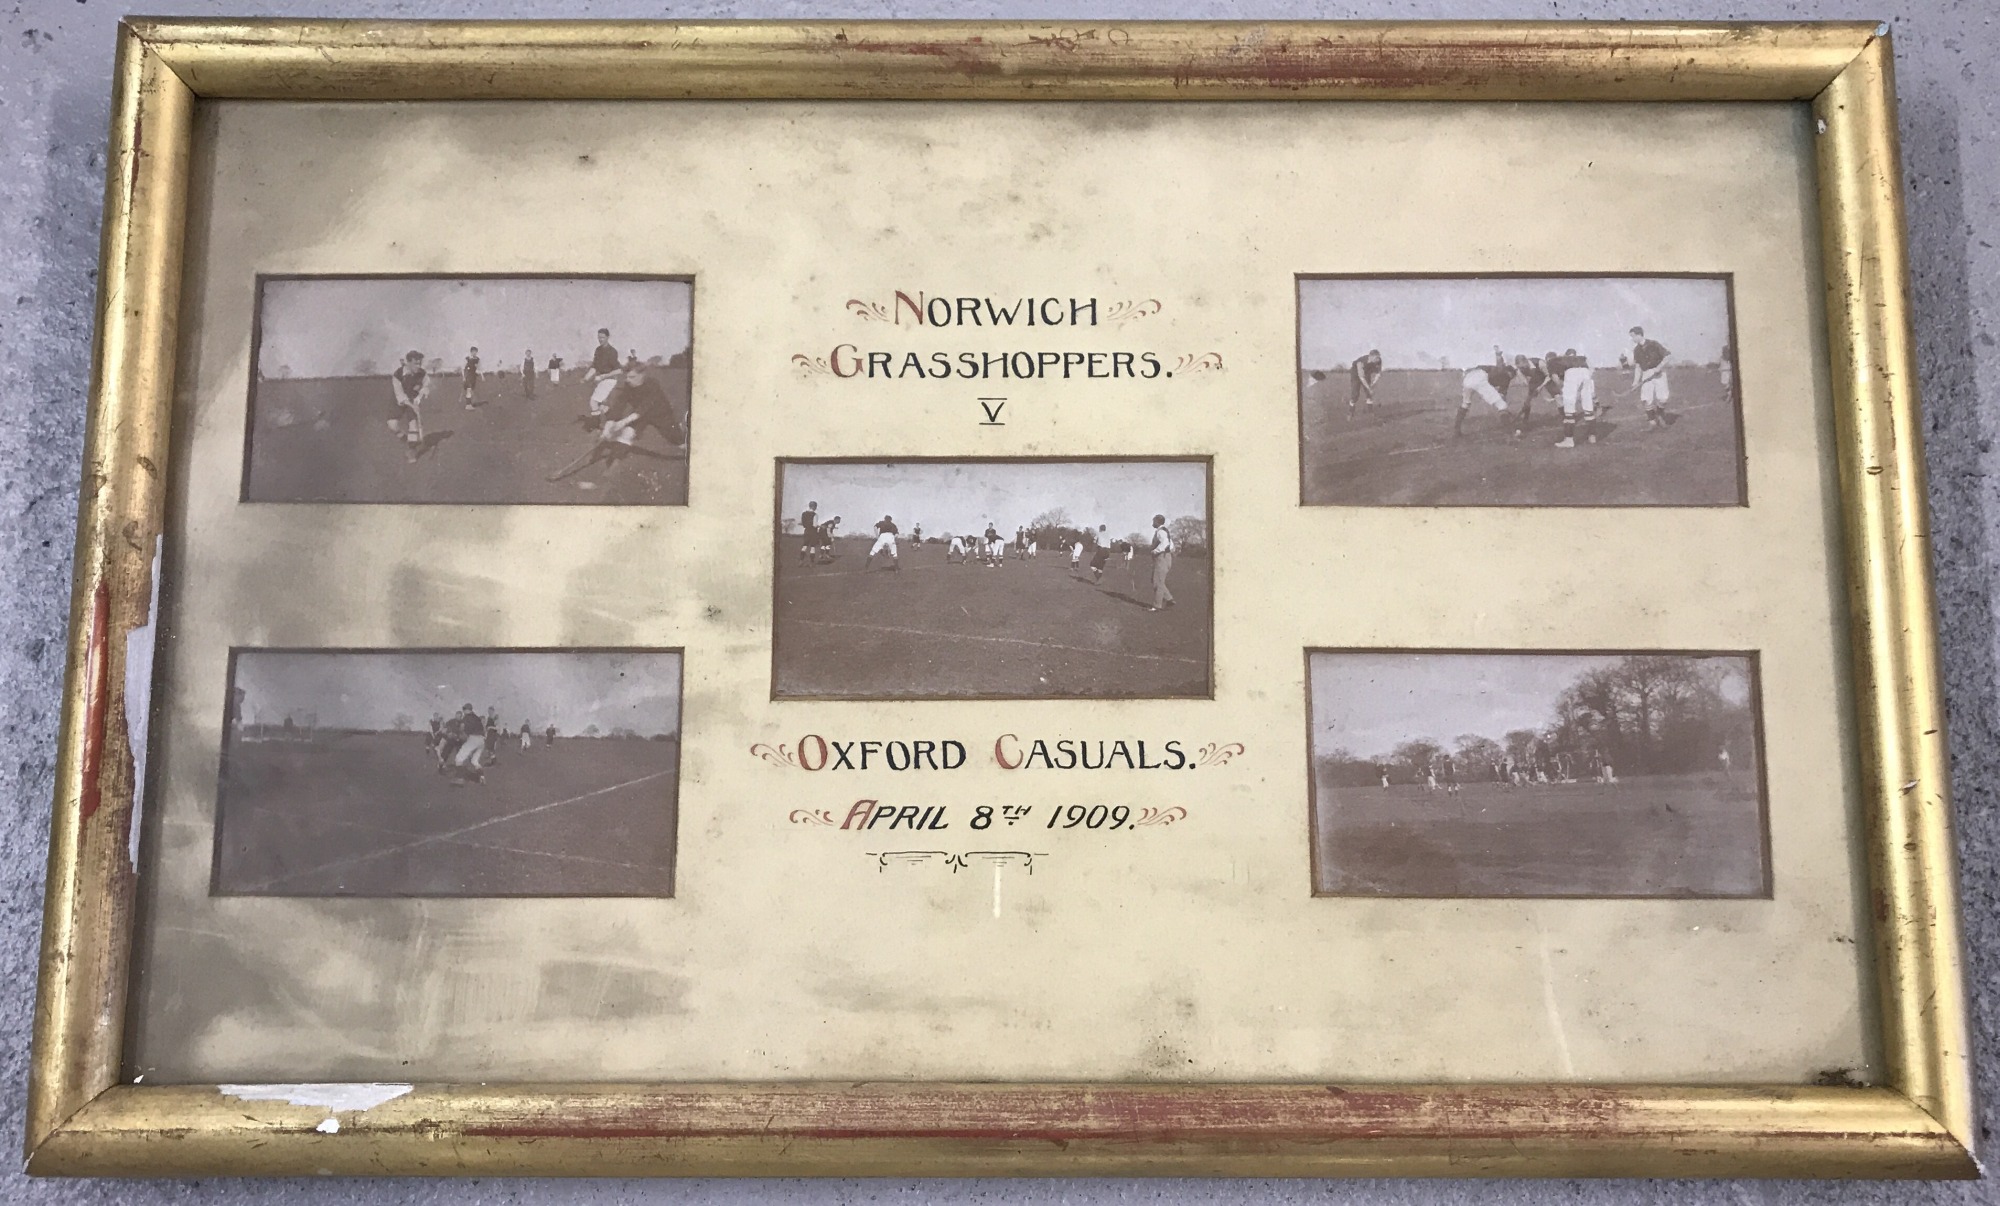 Original photographs from the Norwich Grasshoppers V's the Oxford Casuals 1909 hockey match.